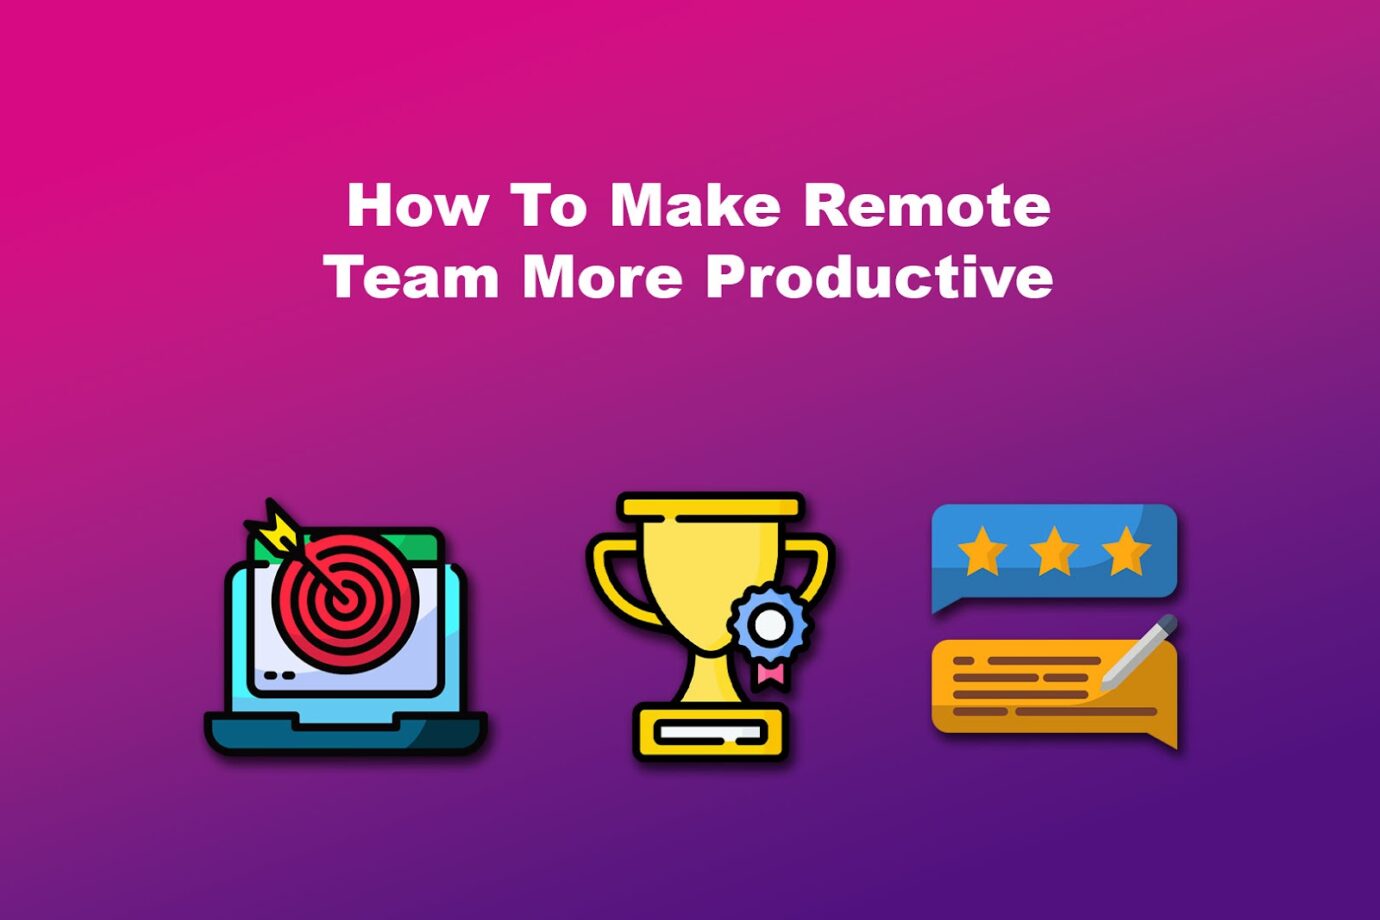 How To Make Remote Team More Productive